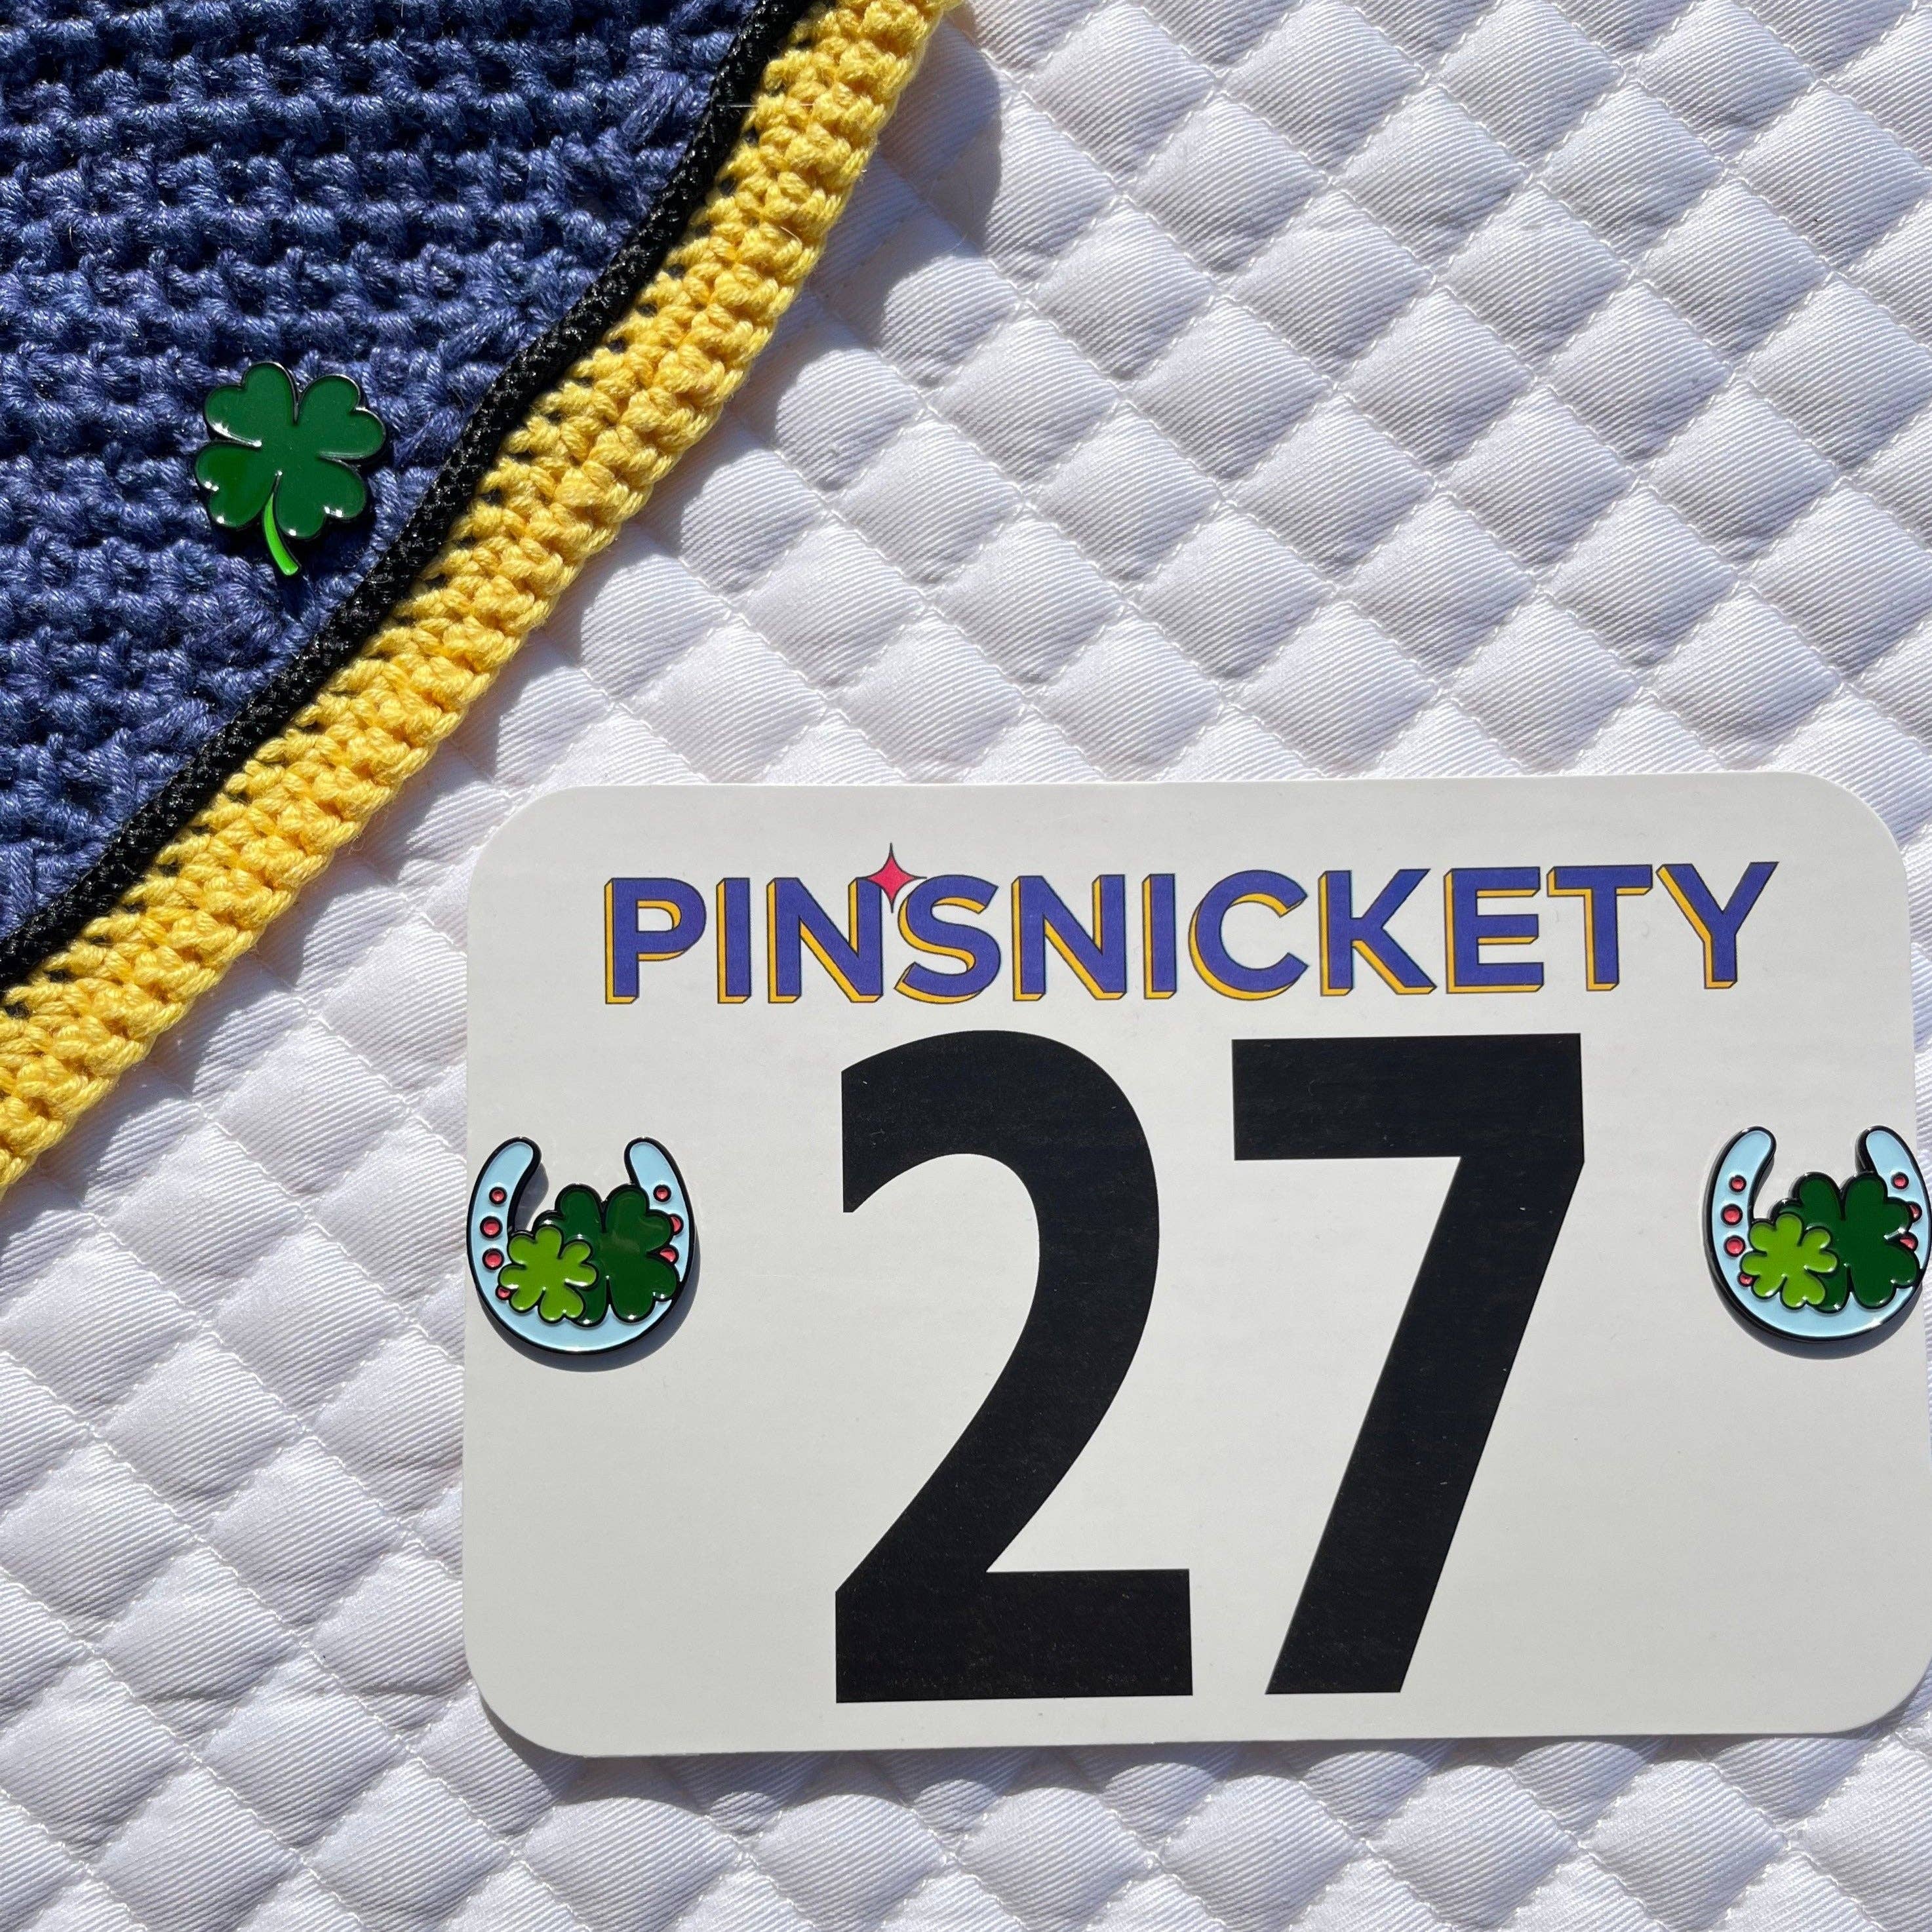 Pinsnickety - Horseshoe Pins